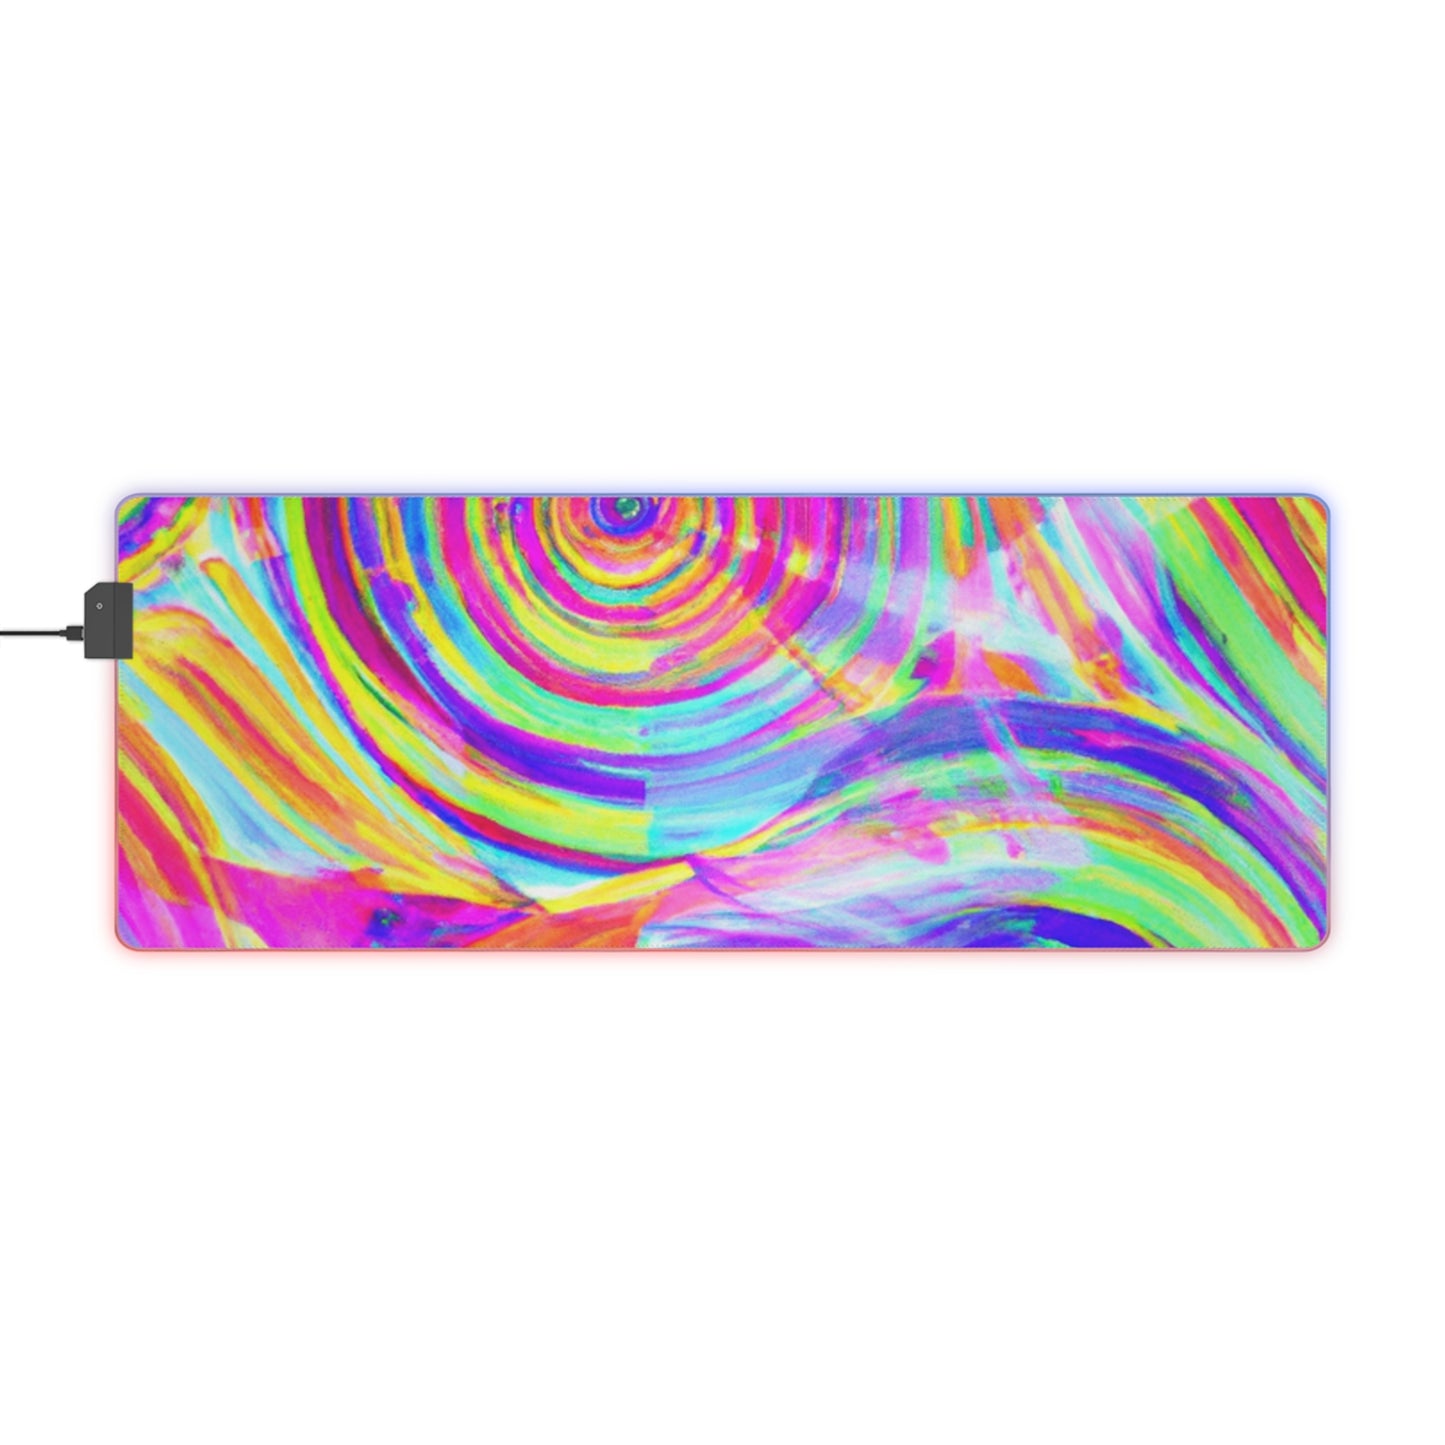 Rocko Robot - Psychedelic Trippy LED Light Up Gaming Mouse Pad